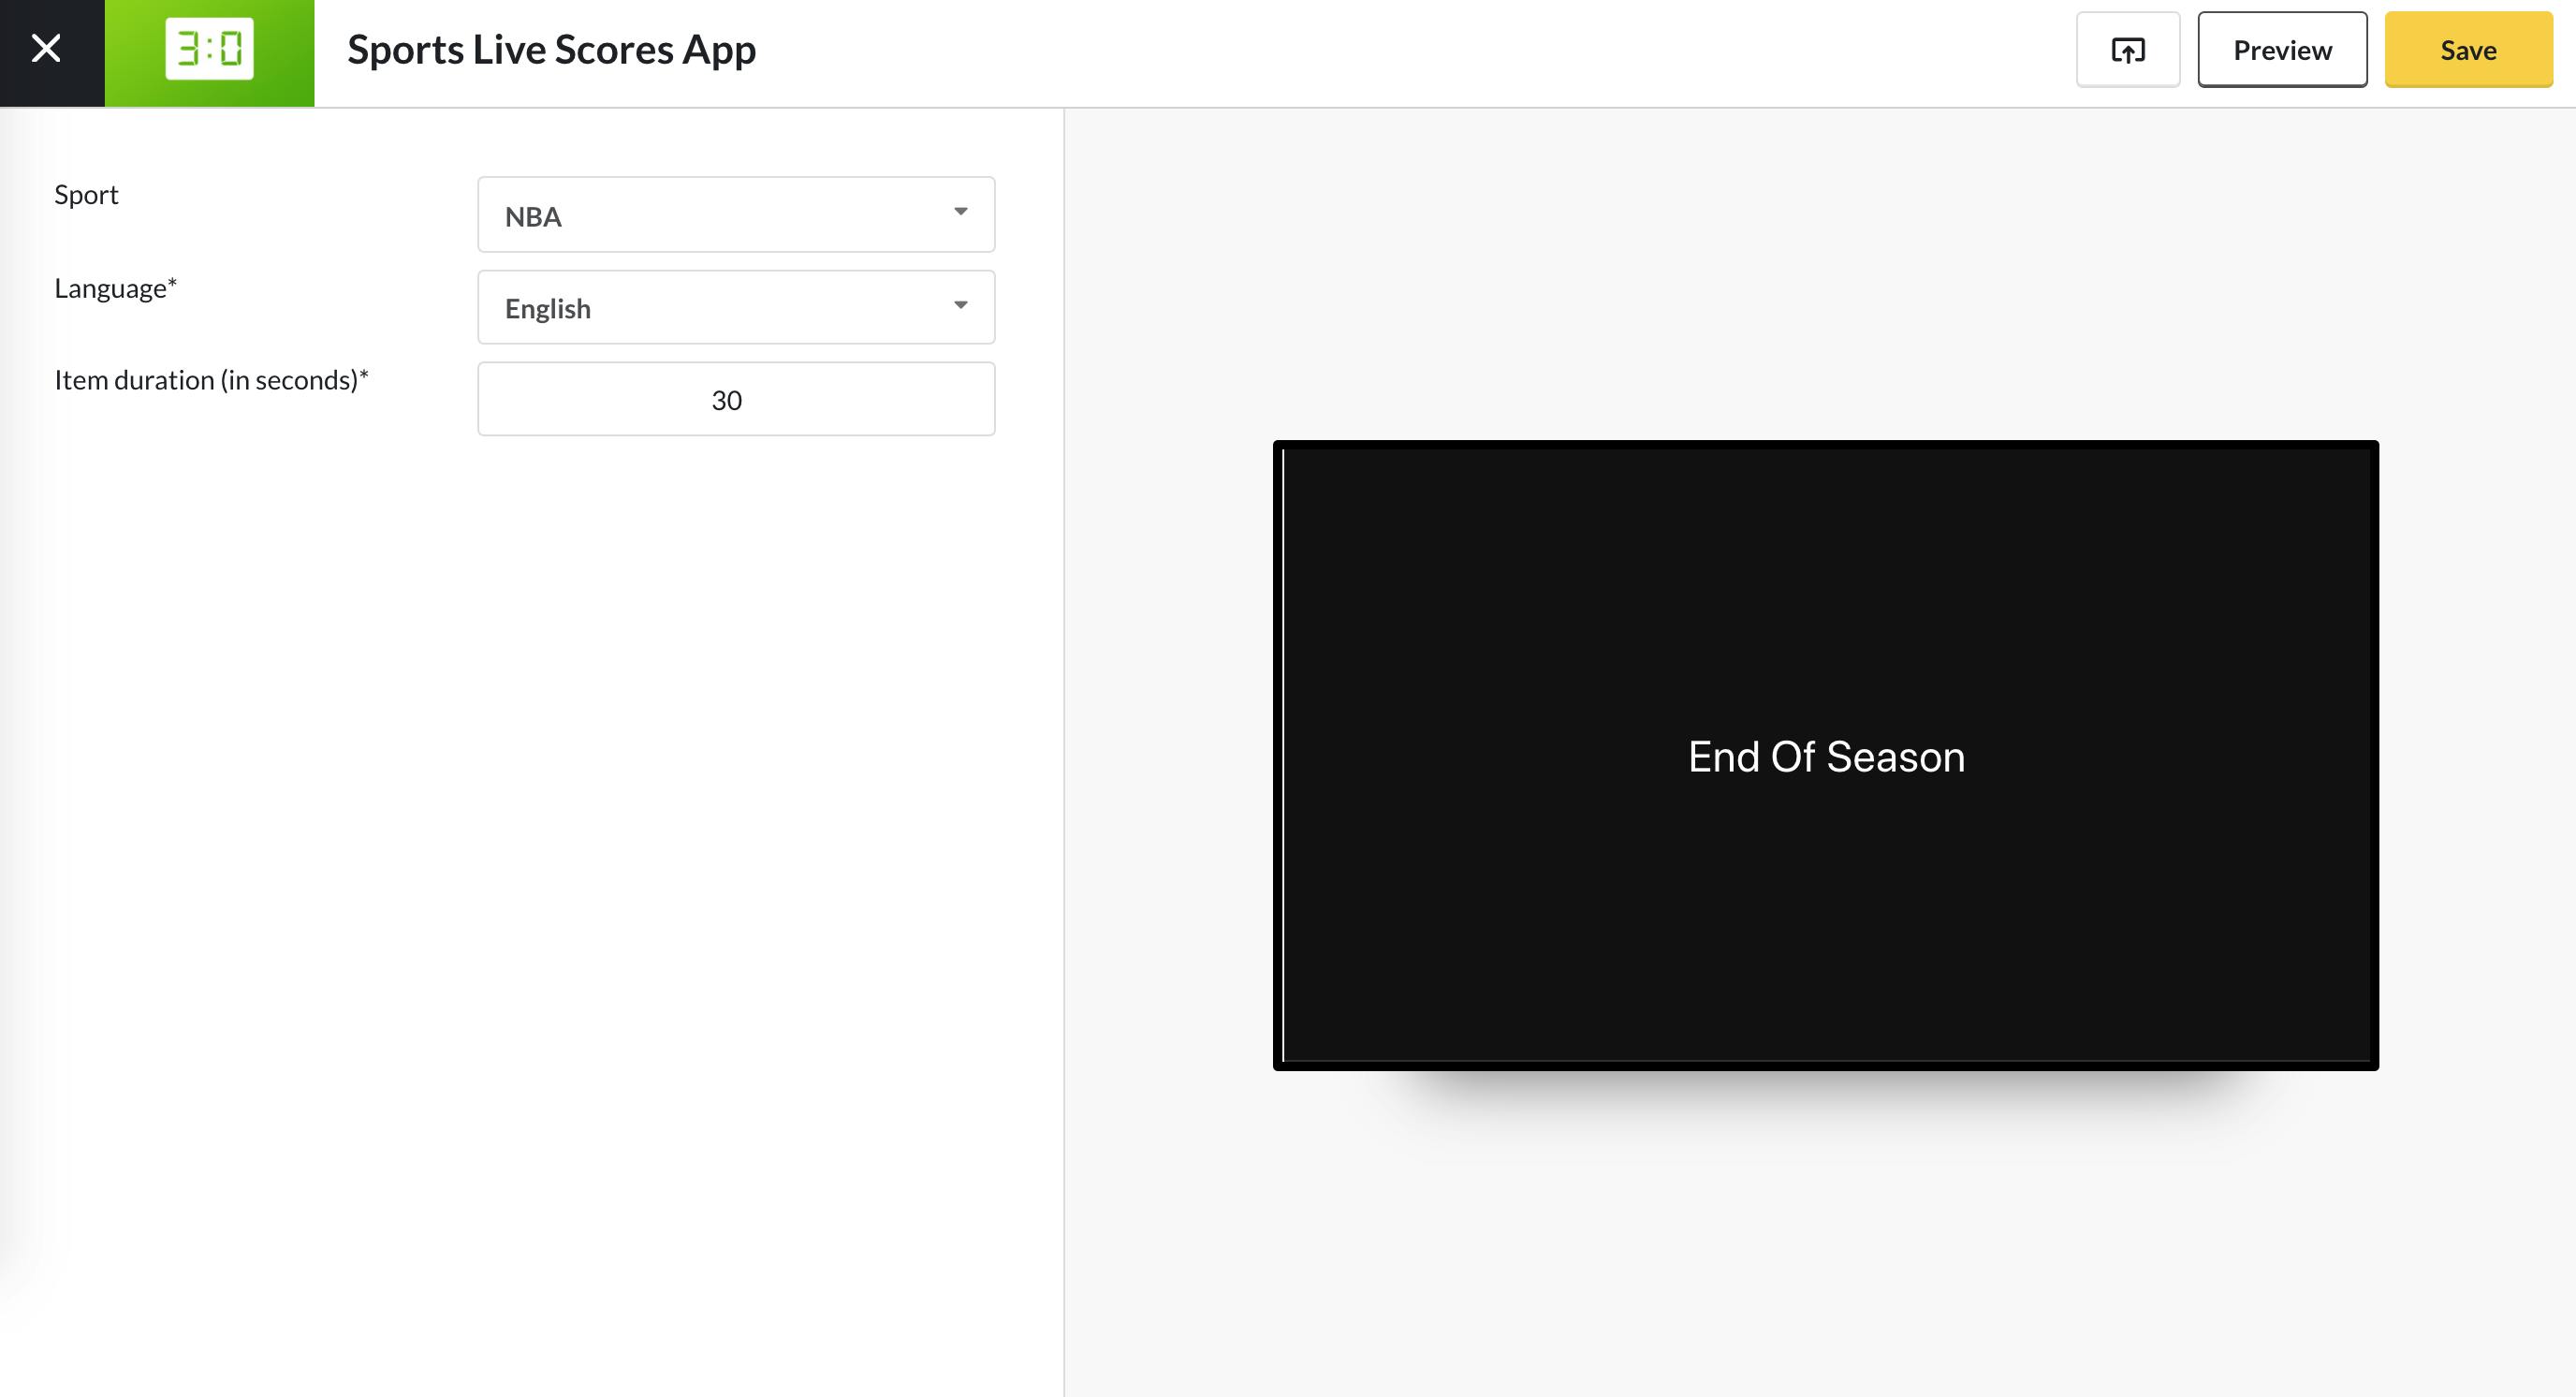 Sports Live Scores App Guide - End of Season 5.14.2020.png
